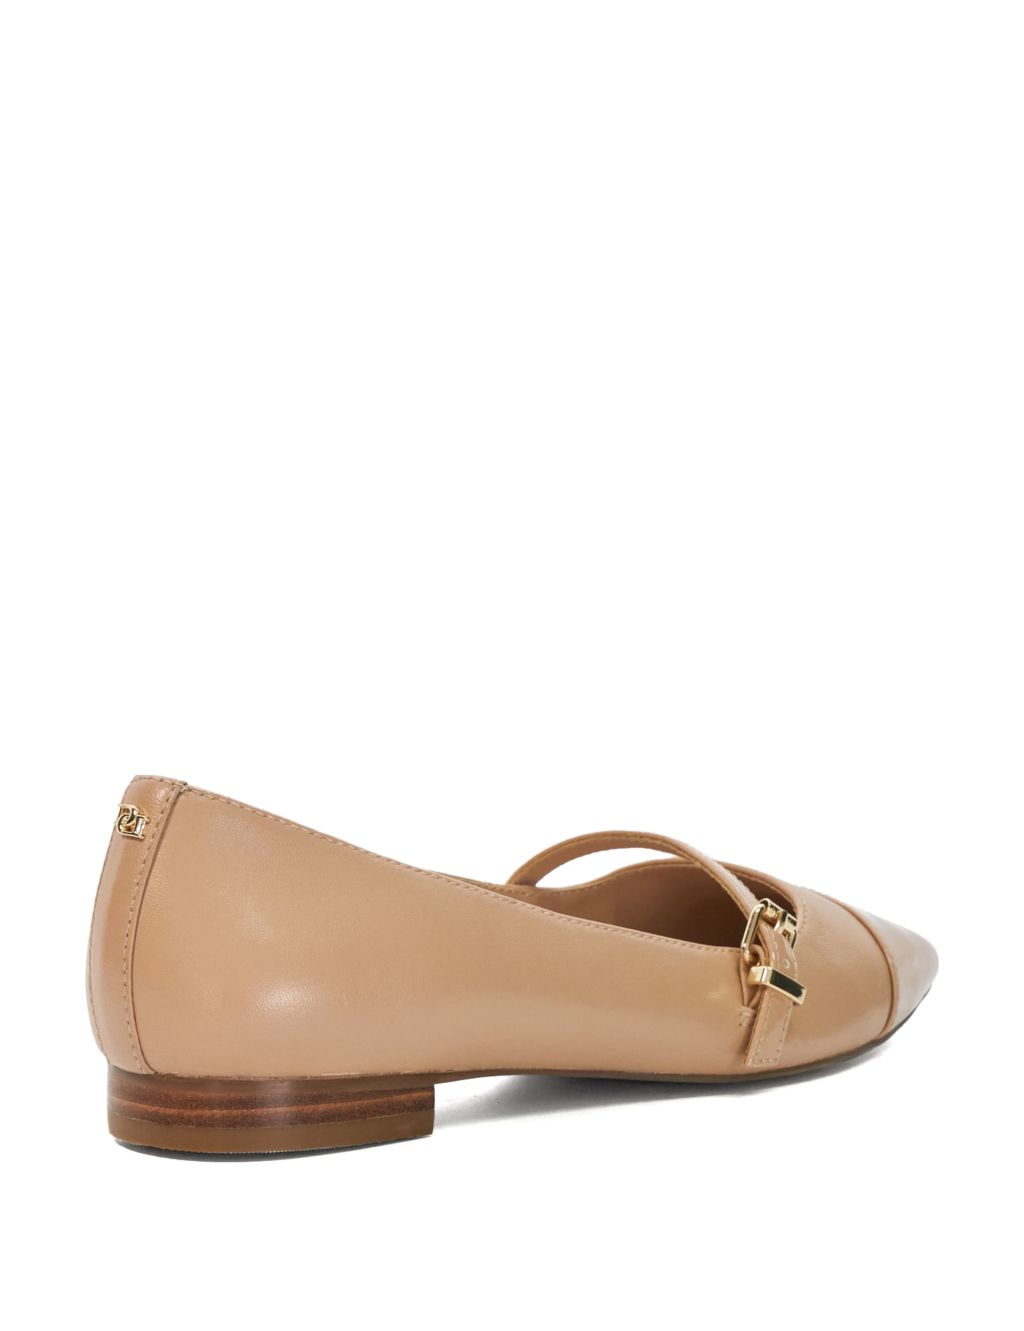 Leather Buckle Flat Ballet Pumps 2 of 5